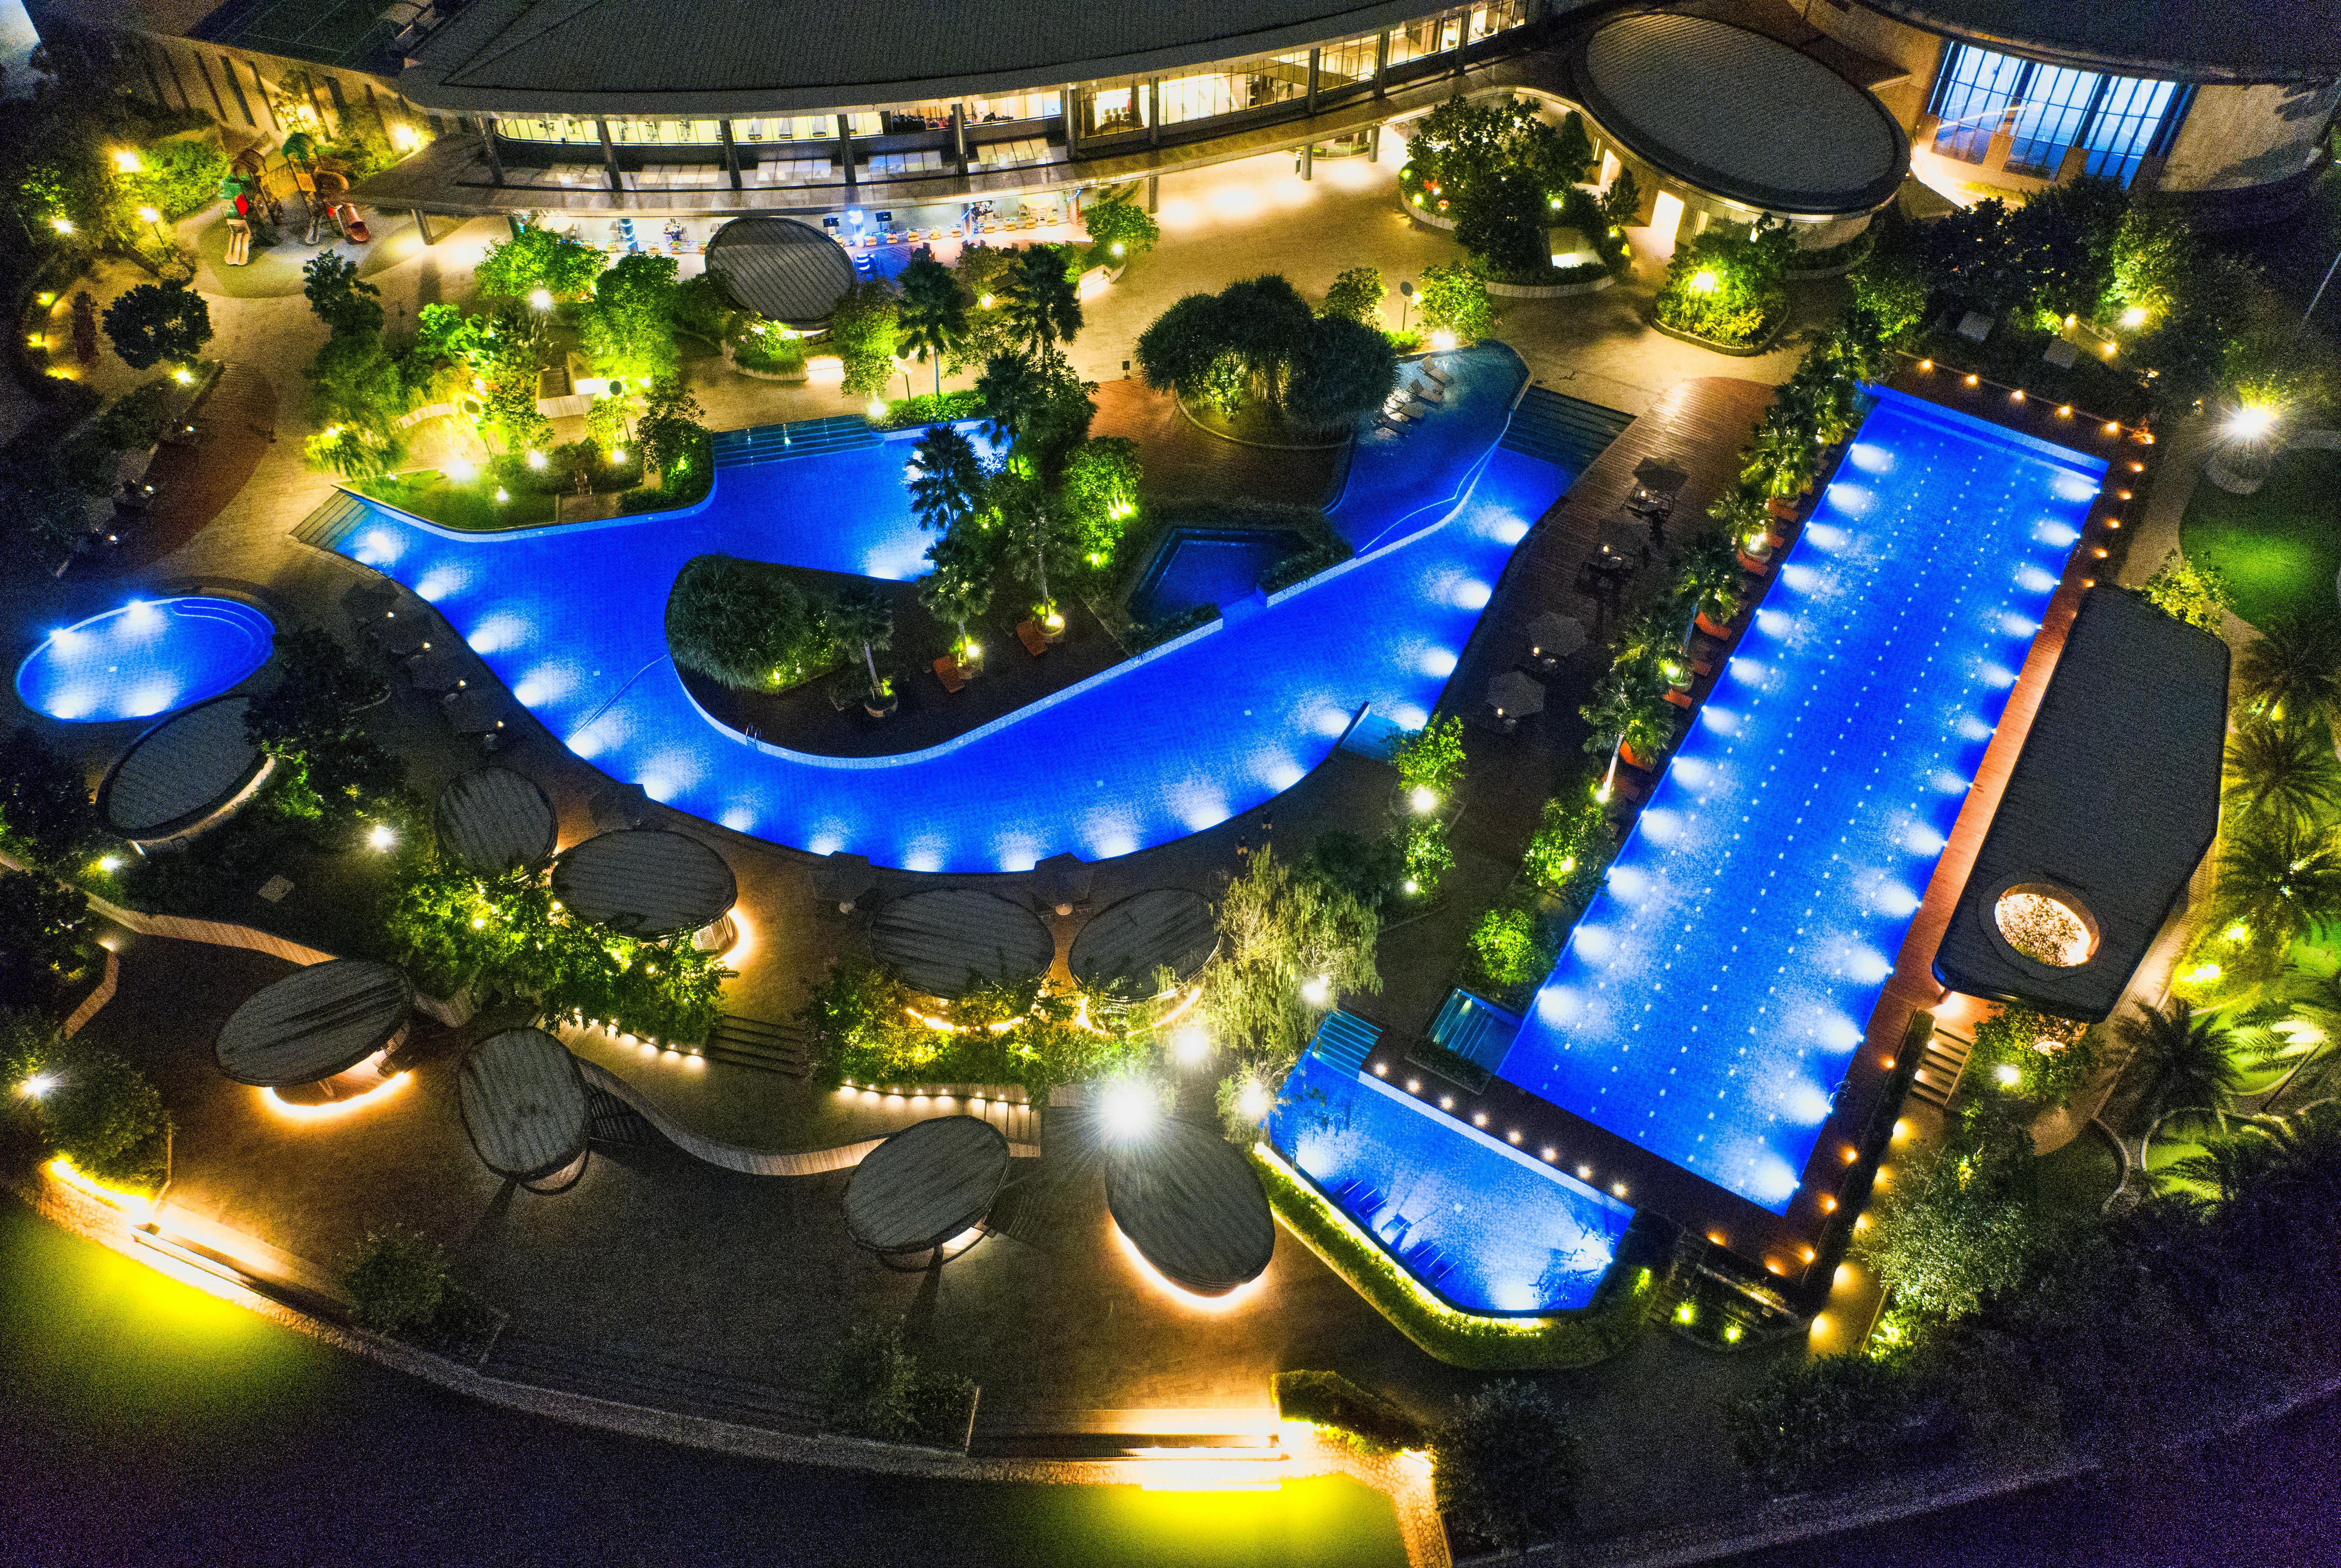 aerial photo of illuminated outdoor swimming pools in various shapes at night